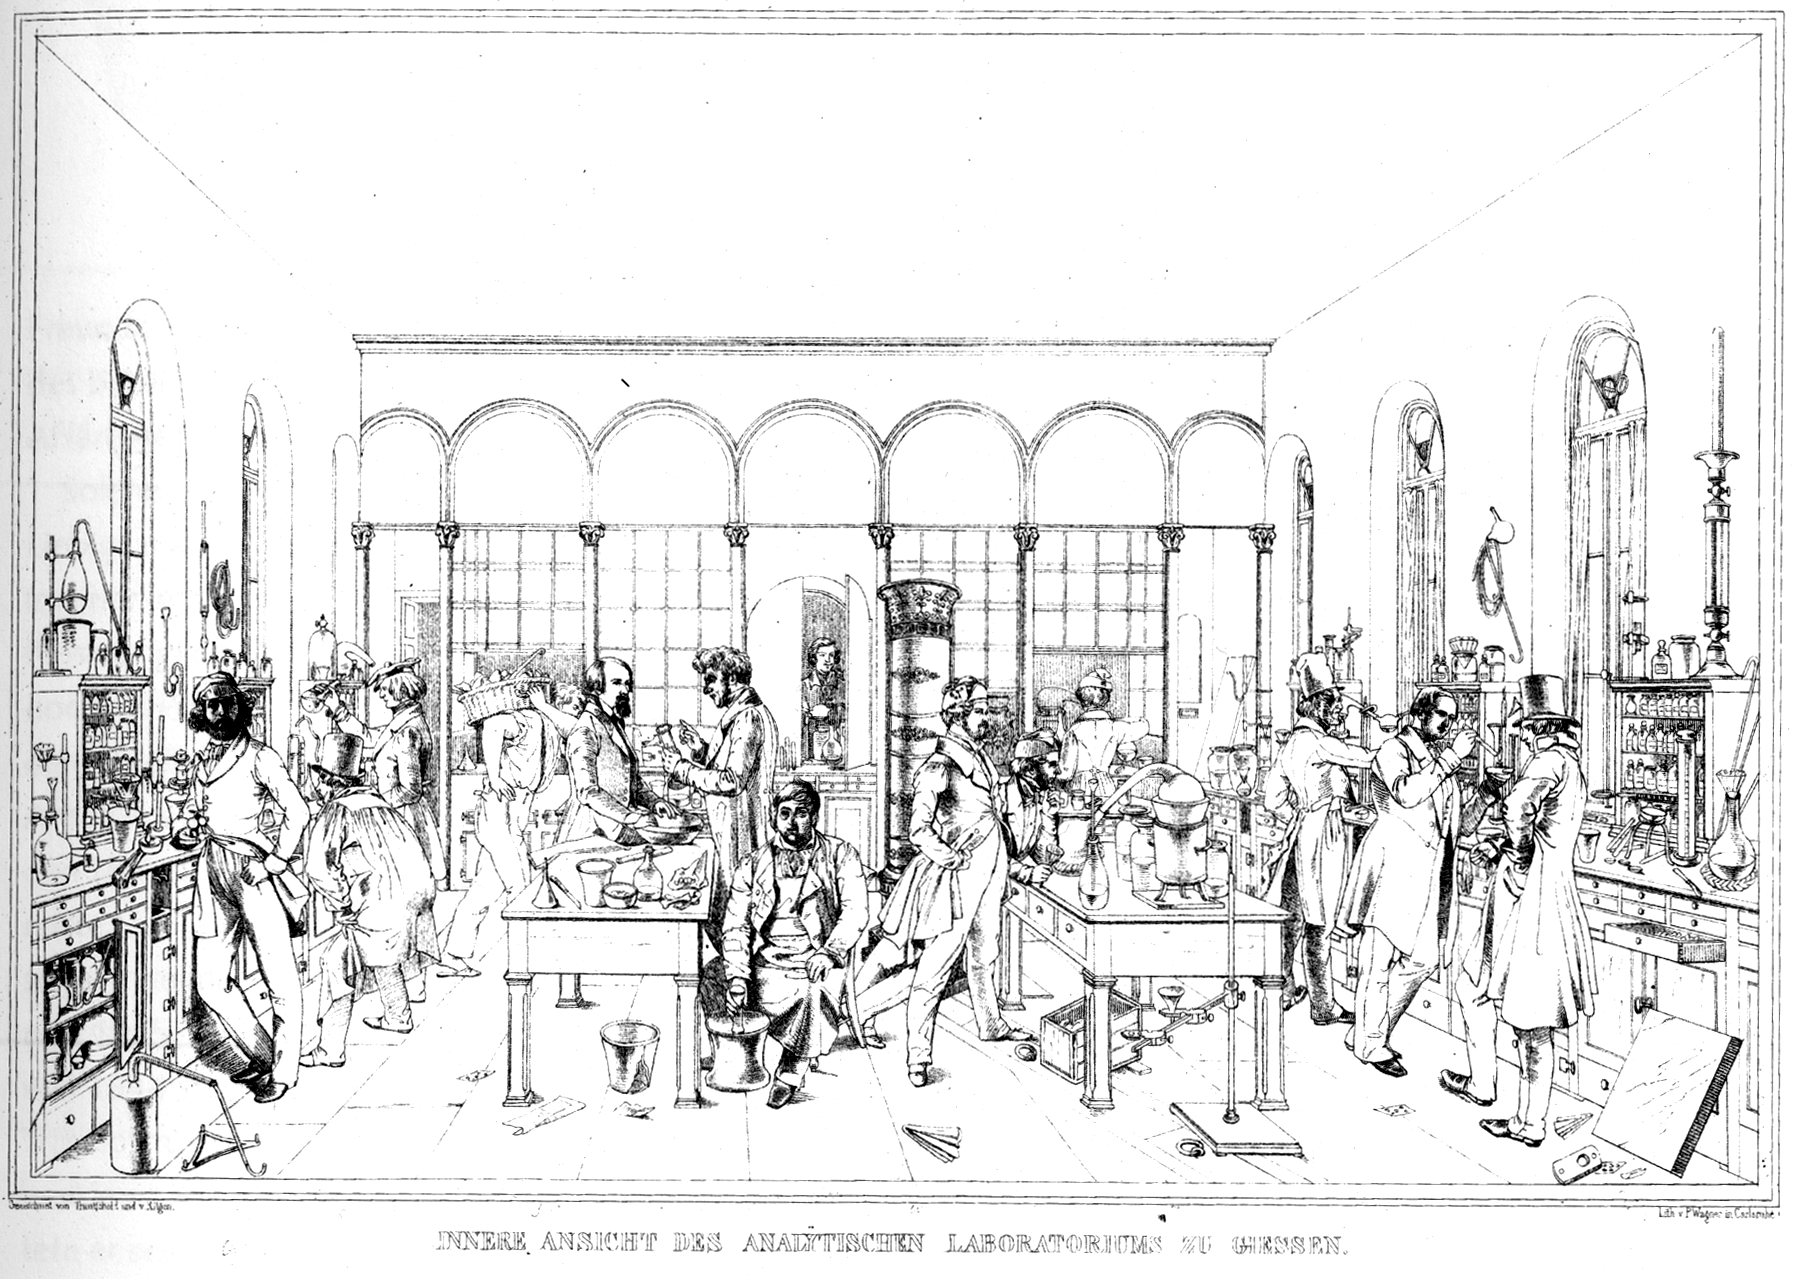 Analytical Laboratory Lithograph depicting the interior of the Analytical Laboratory in Gießen, 1842.